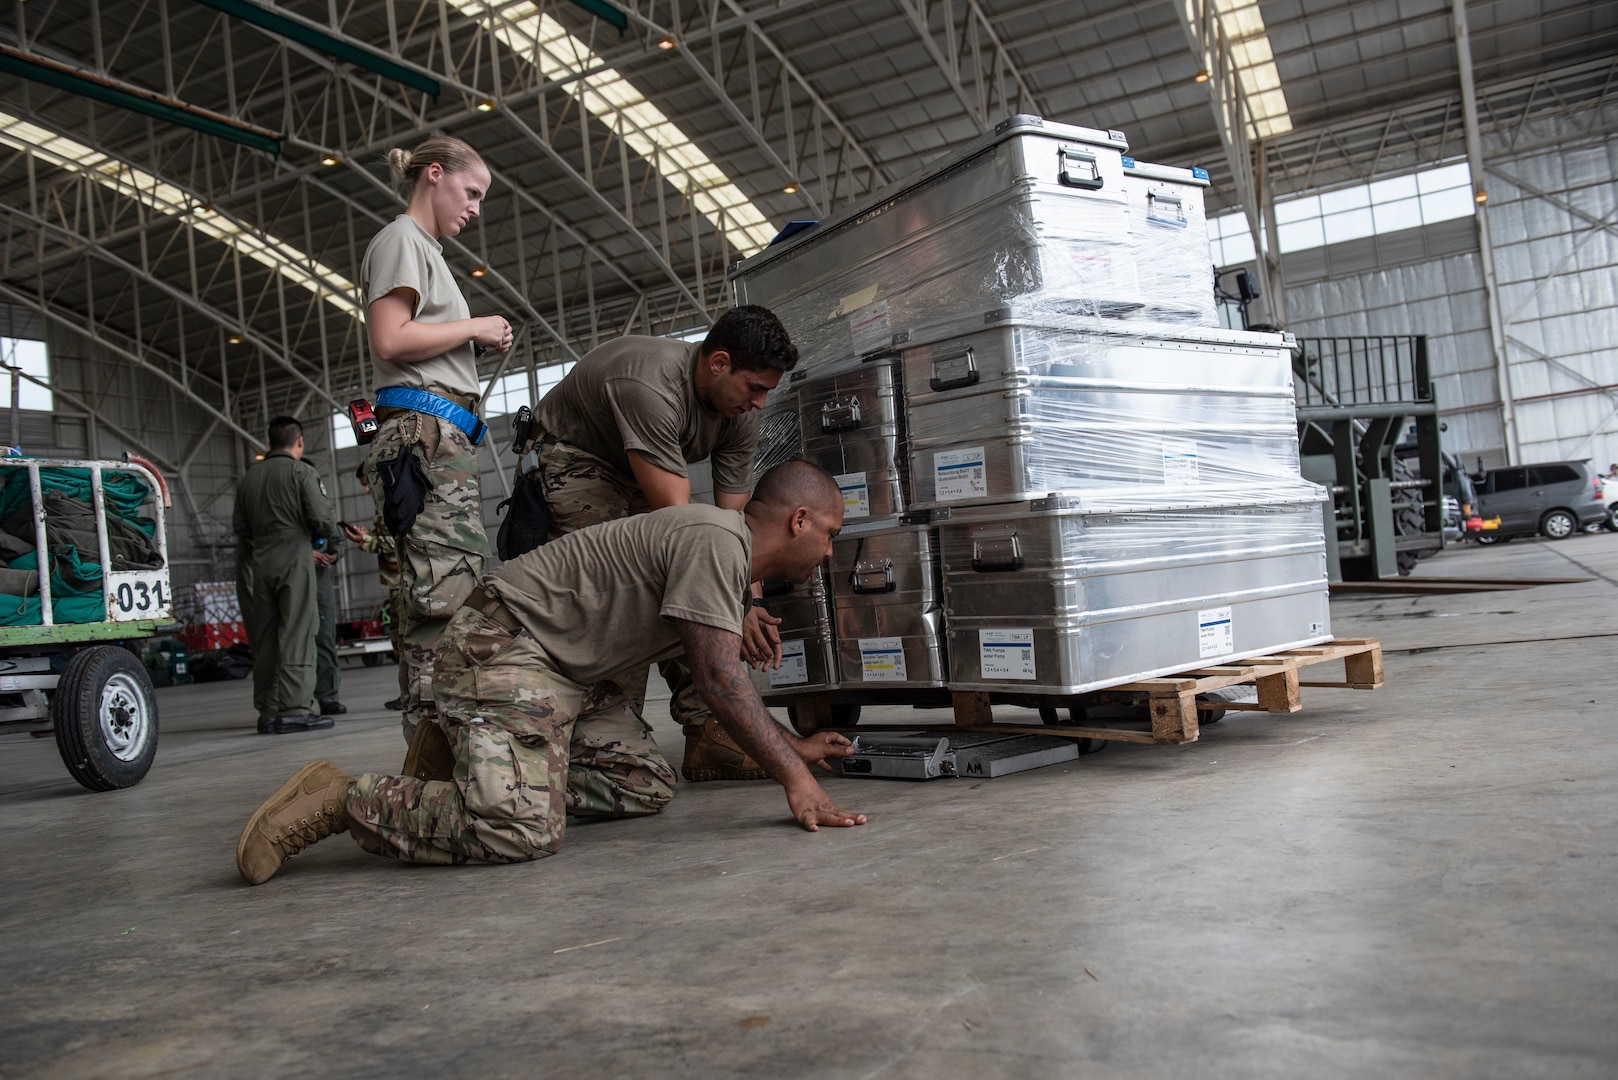 U.S. Air Force aerial porters assigned to the 36th Contingency Response Group Andersen Air Force Base, Guam, prepare and inspect cargo at the airport in Balikpapan, Indonesia Oct. 5, 2018. The airport is the staging ground for all humanitarian goods before being transported to Palu, Indonesia where they are received and distributed to those affected by the 7.5 magnitude earthquake and tsunami. (U.S. Air Force photo by Master Sgt. JT May III)